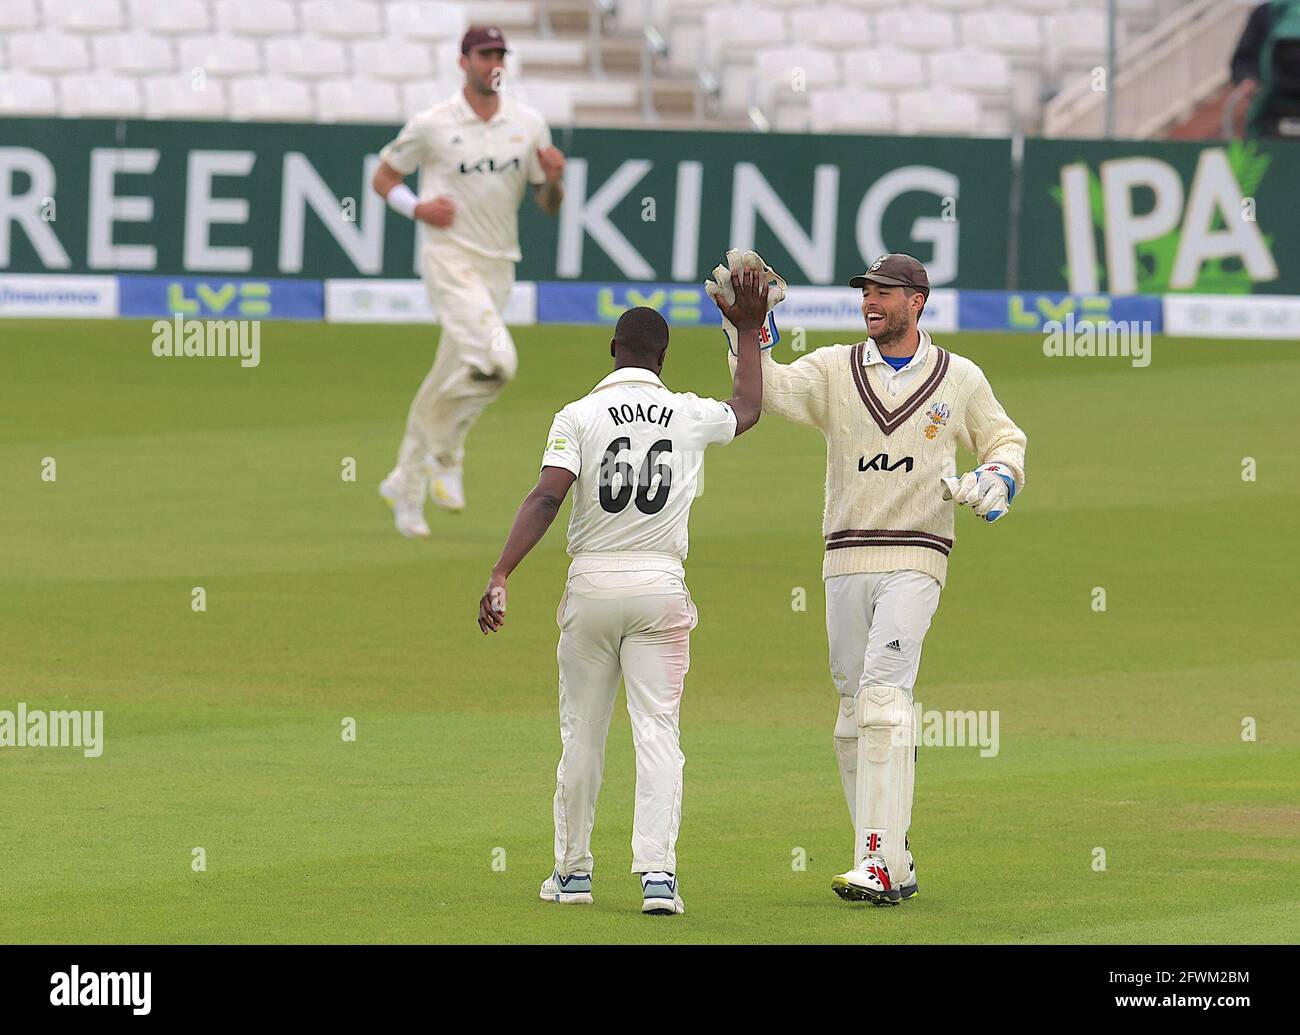 London, UK. 23 May, 2021. London, UK. Surrey’s Kemar Roach gets Middlesex’s Martin Andersson as Surrey take on Middlesex in  the County Championship at the Kia Oval, day four. David Rowe/Alamy Live News Stock Photo